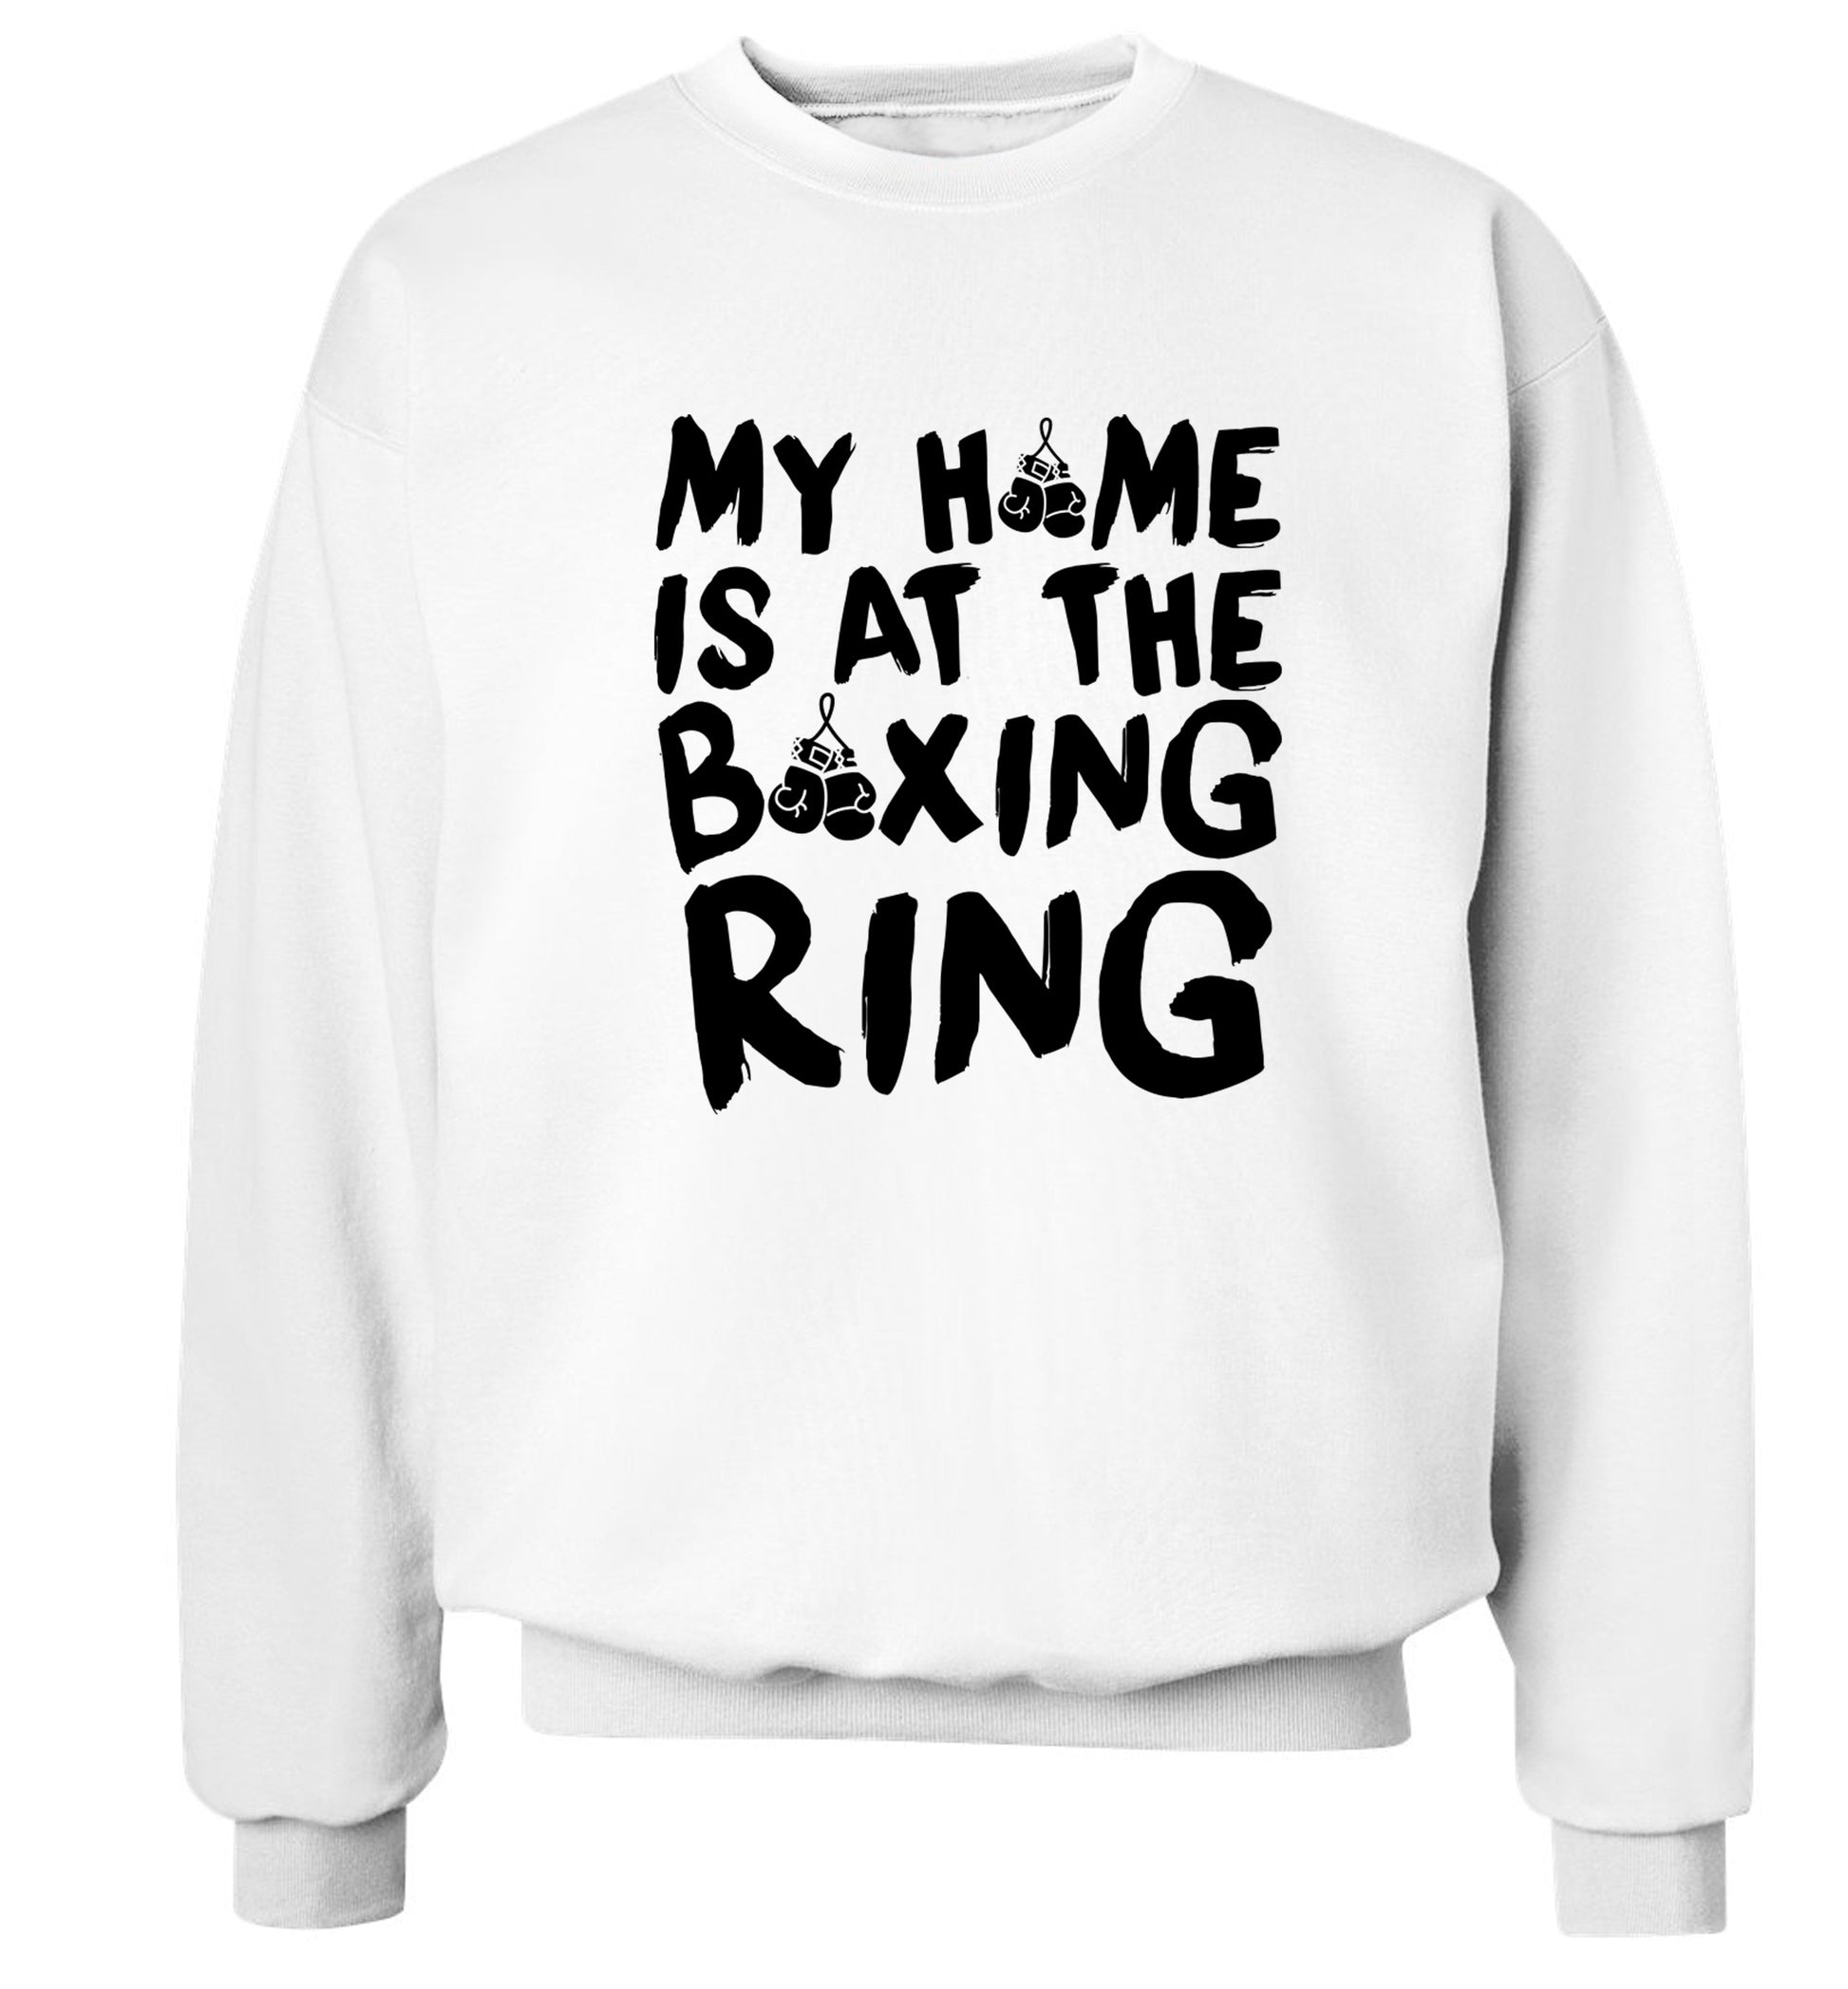 My home is at the boxing ring Adult's unisex white Sweater 2XL